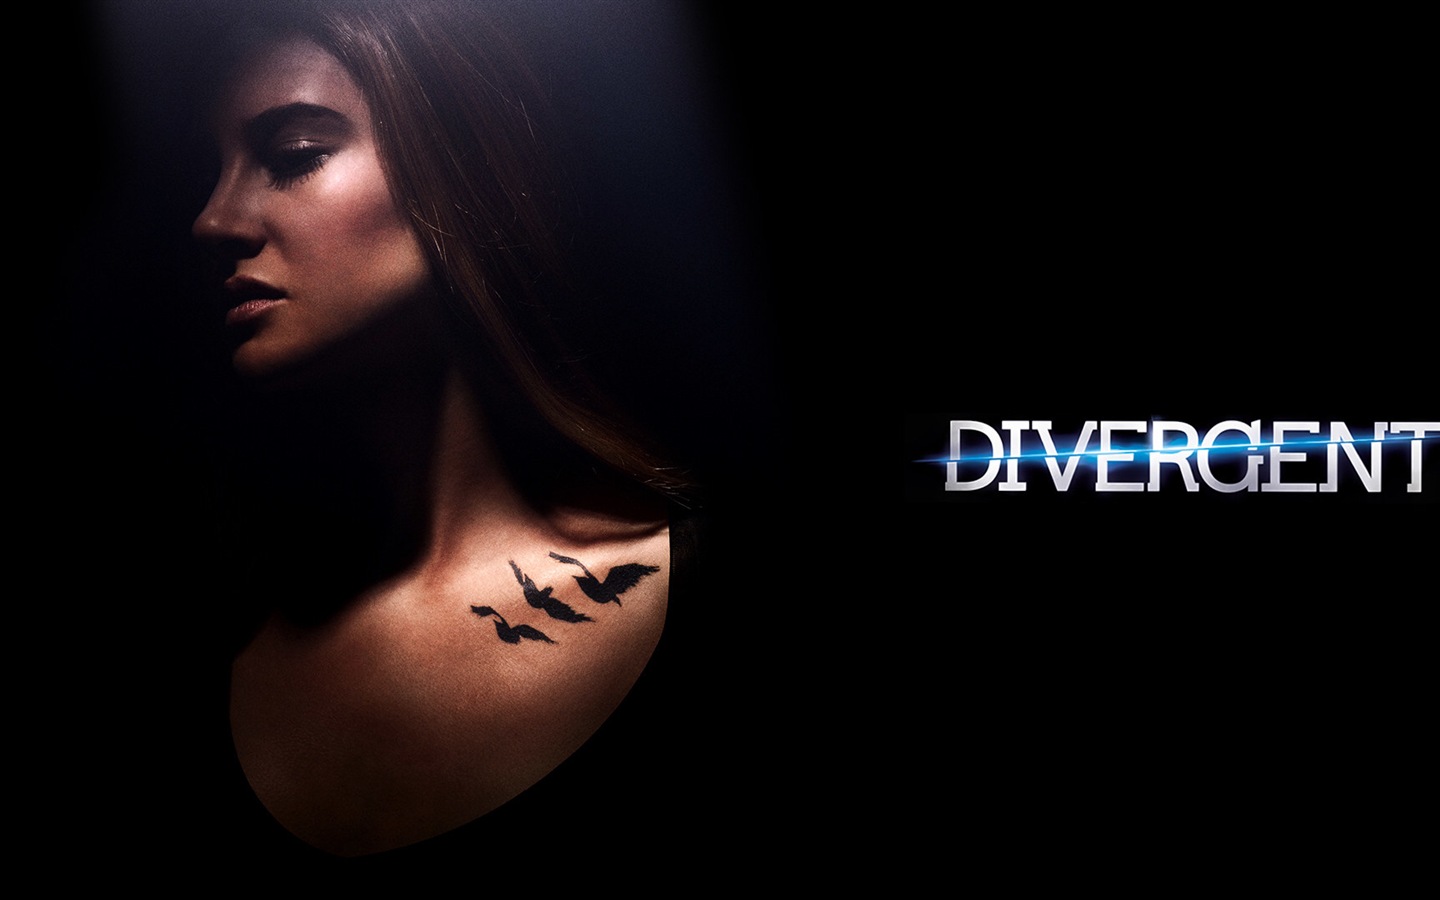 Divergent movie HD wallpapers #7 - 1440x900